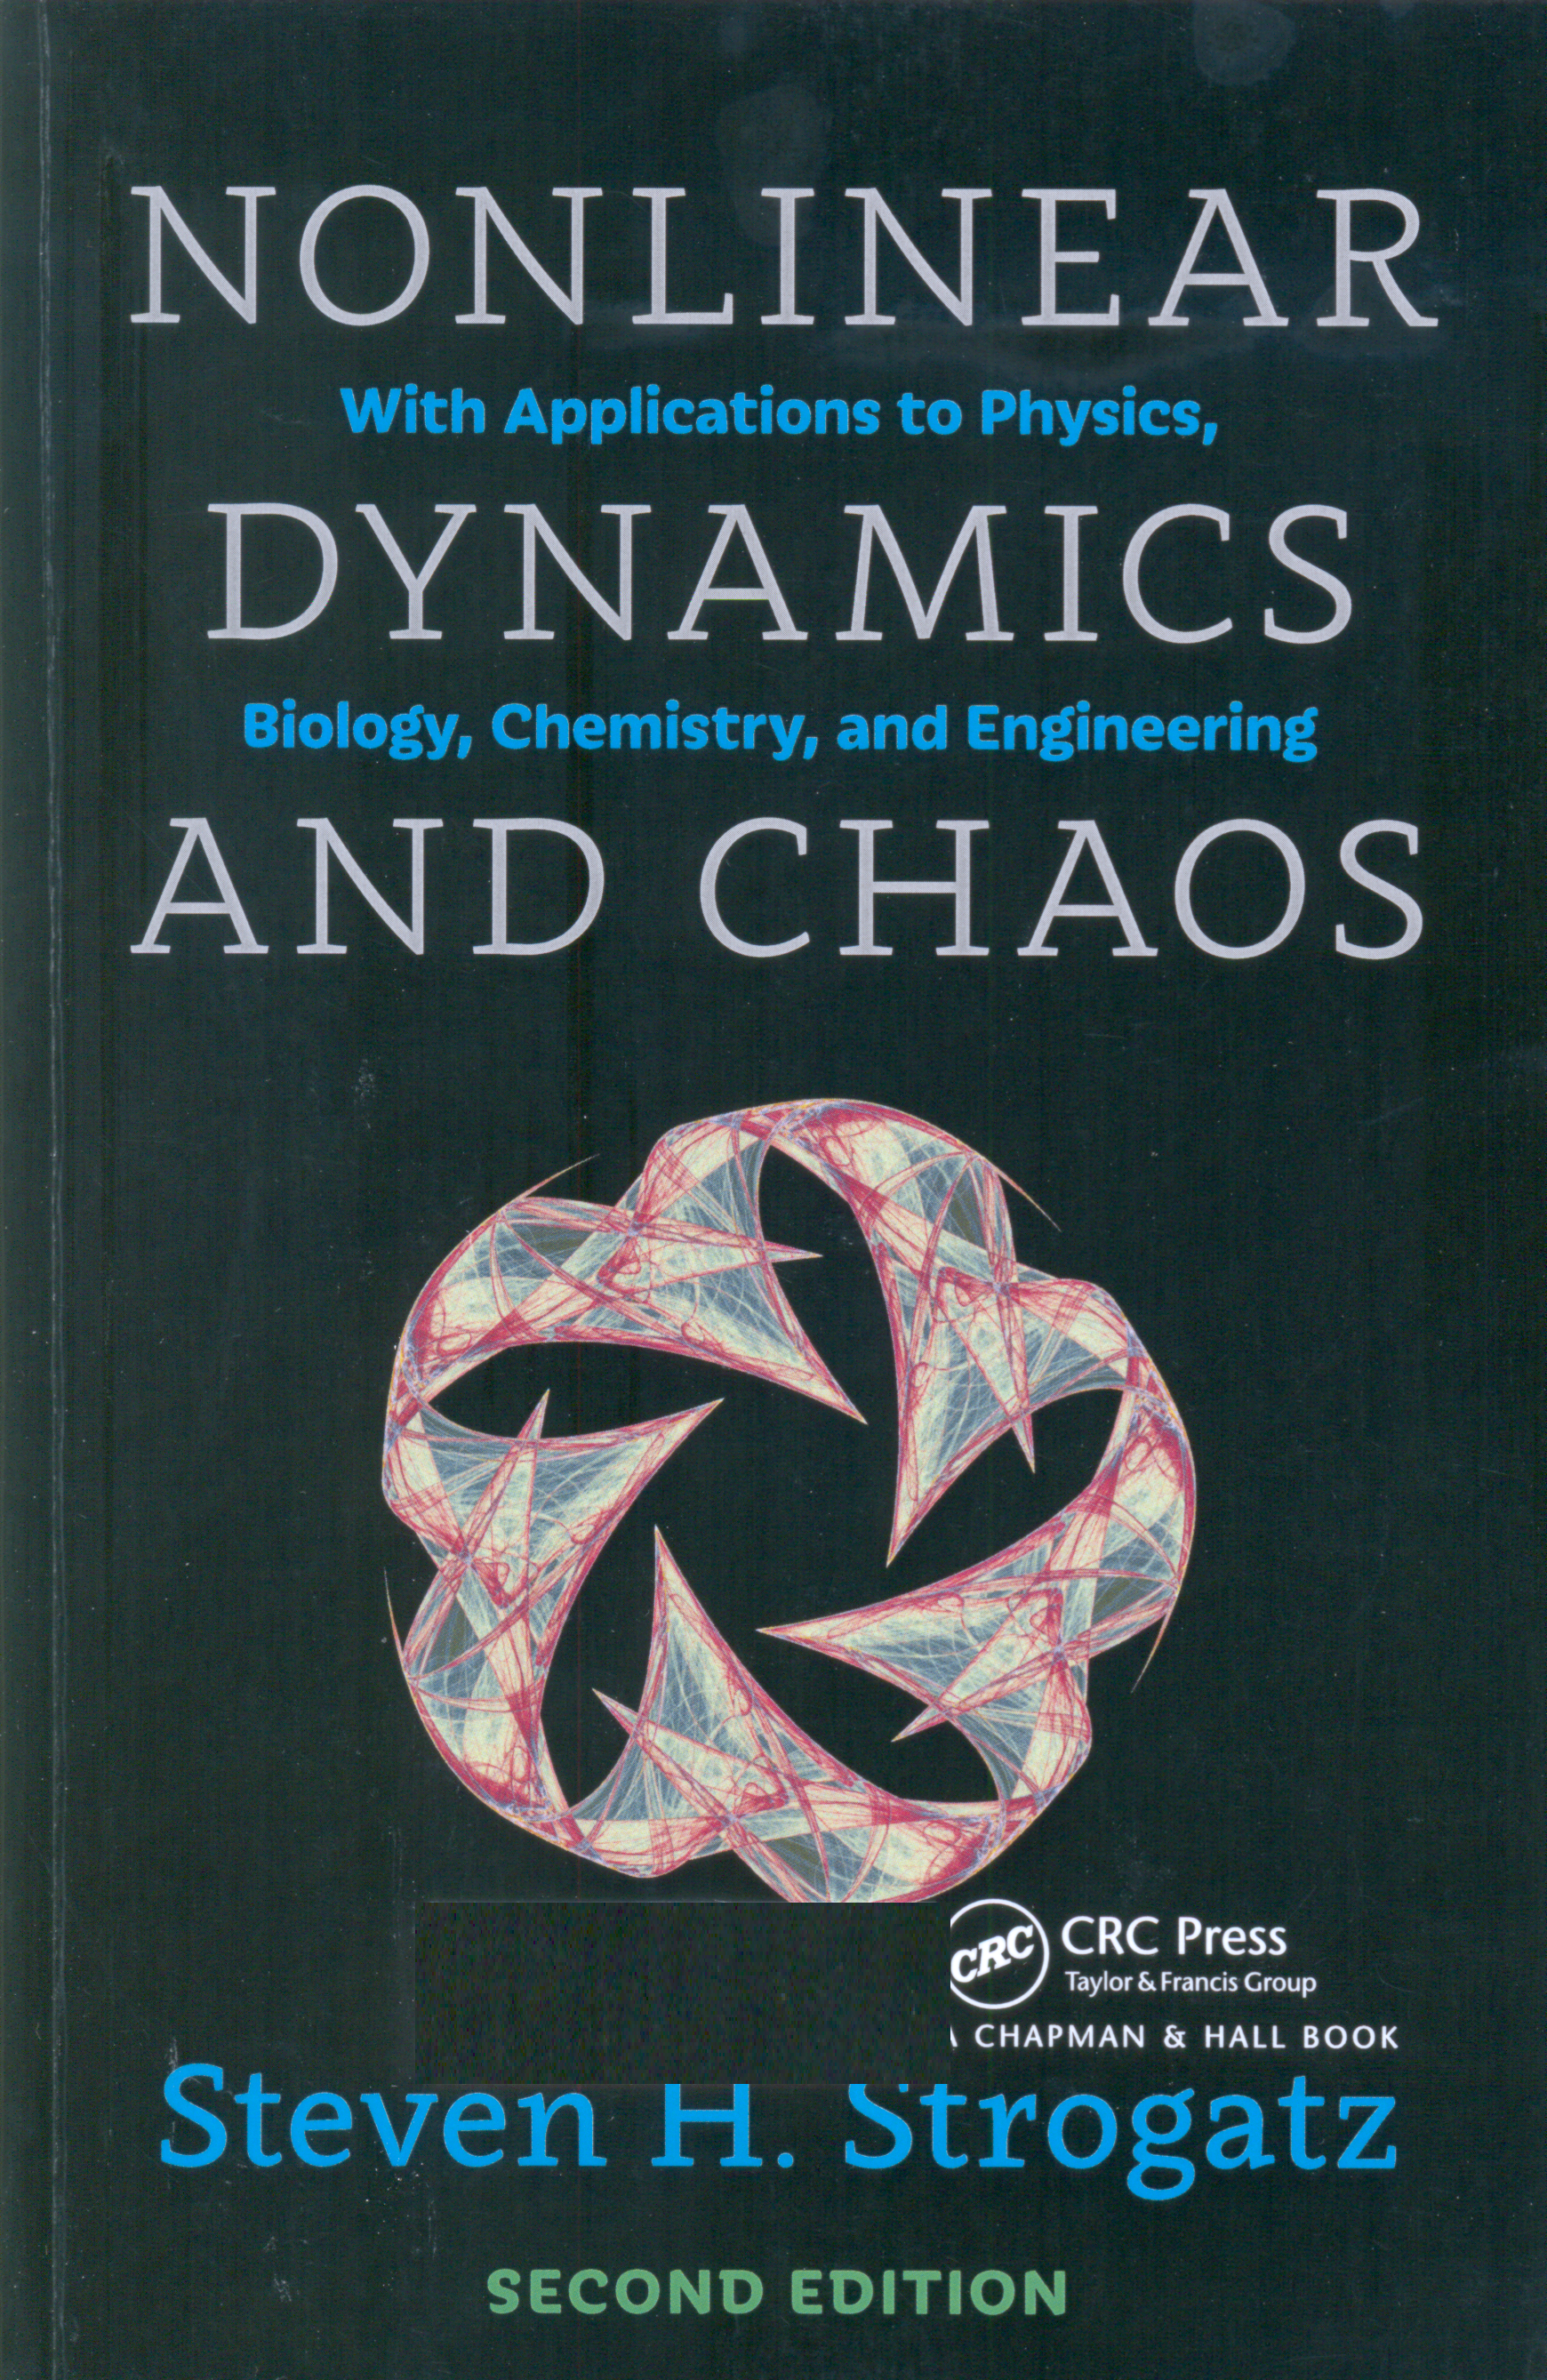 Nonlinear dynamics and chaos : with applications to physics, biology, chemistry, and engineering / Steven H. Strogatz